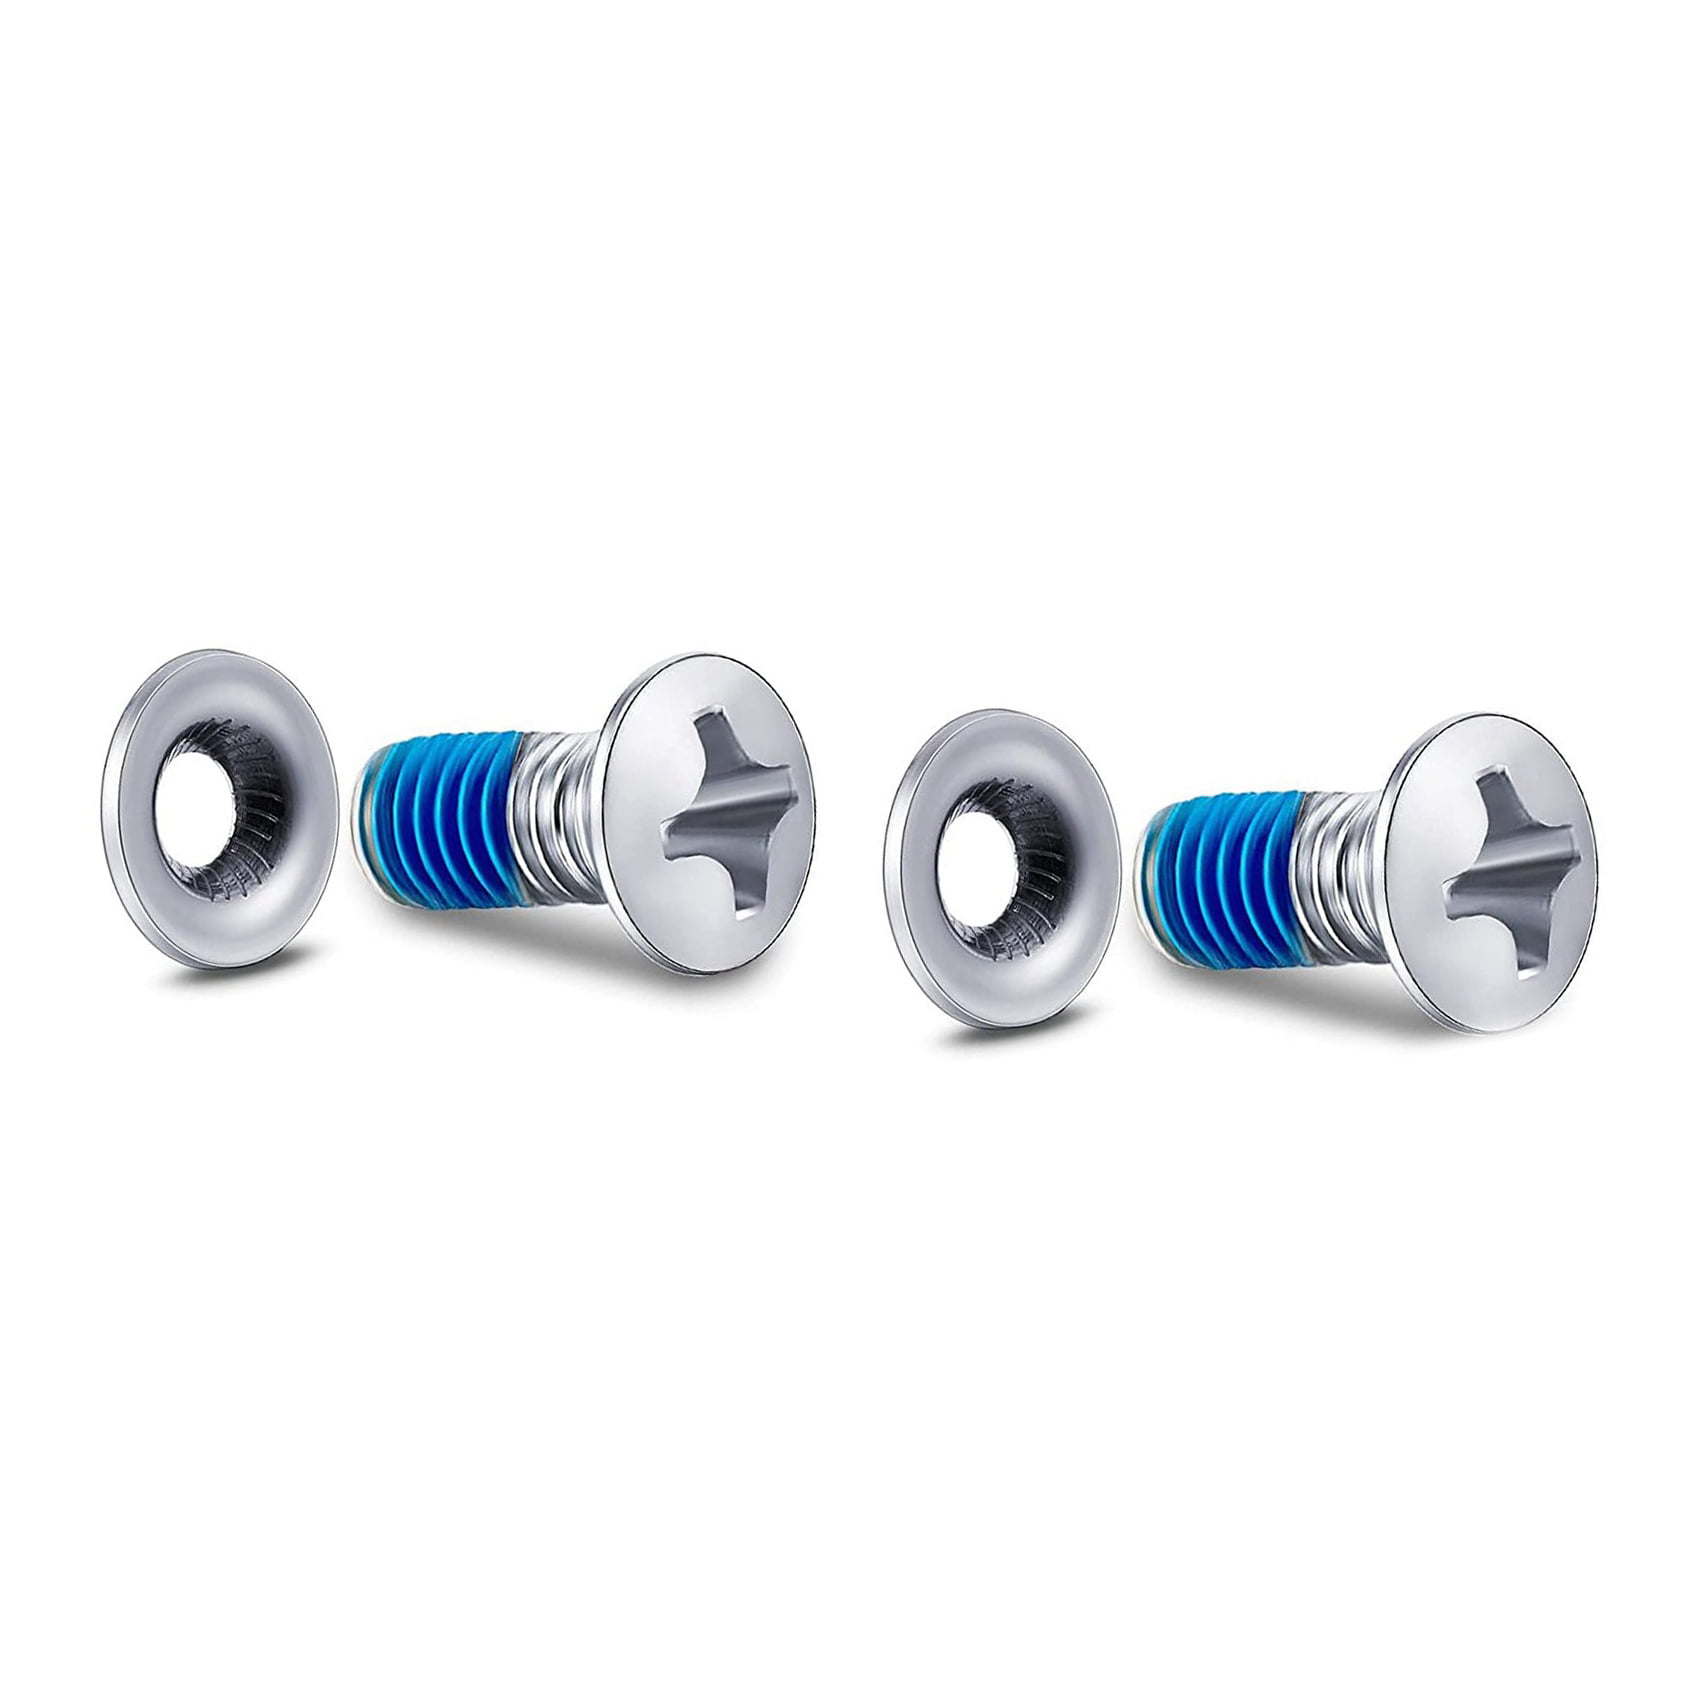 Snowboard Binding Screw Set Include 4 Pieces Snowboard Mounting Screws and 4 Pieces Snowboarding Screw Washers, Blue